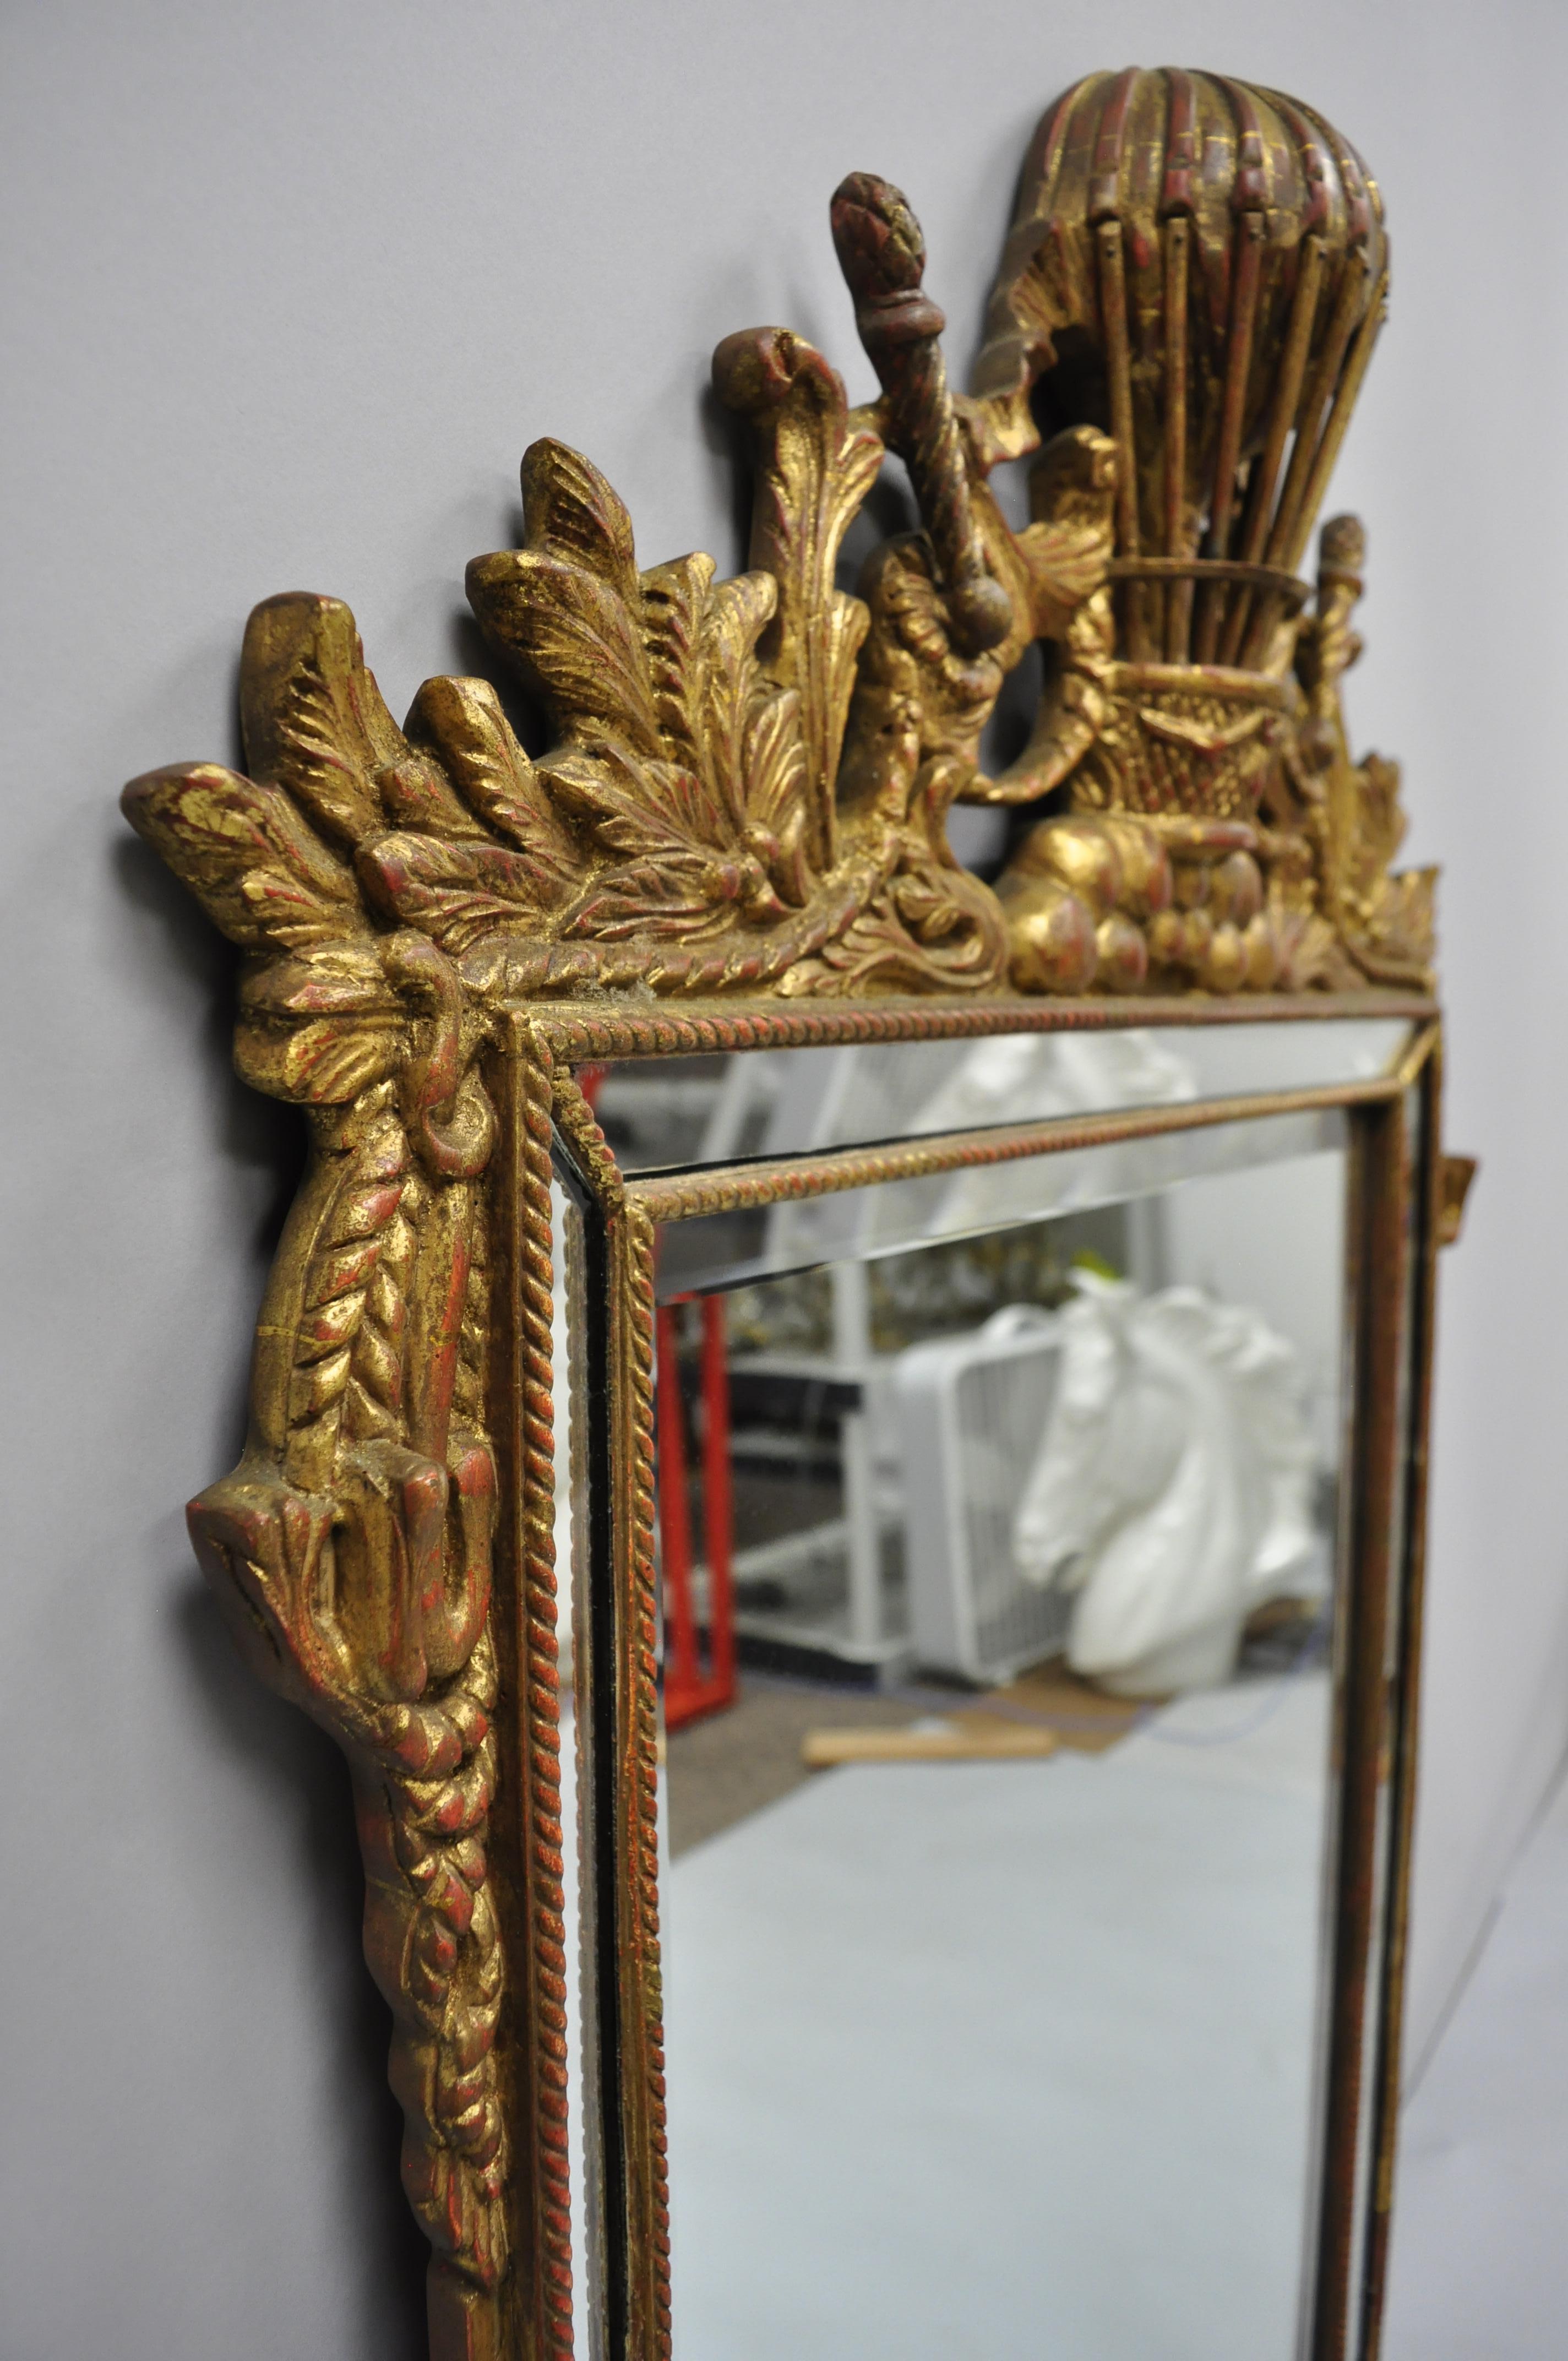 20th Century Italian Gold Giltwood French Empire Style Mirror with Hot Air Balloon Crest